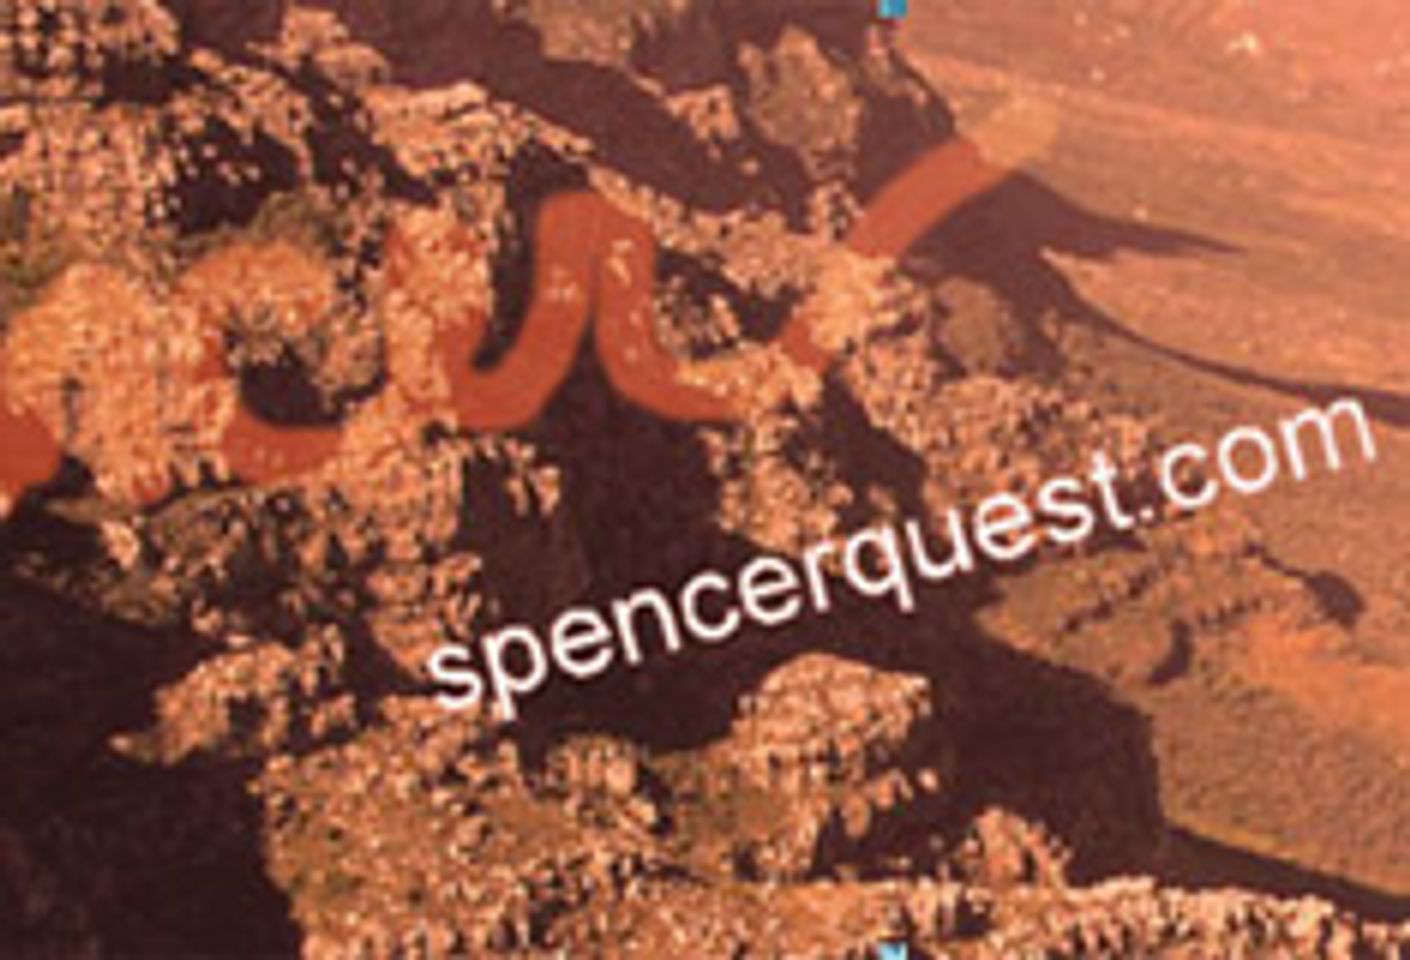 Spencer Quest Monthly Art Auctions to Benefit Charities